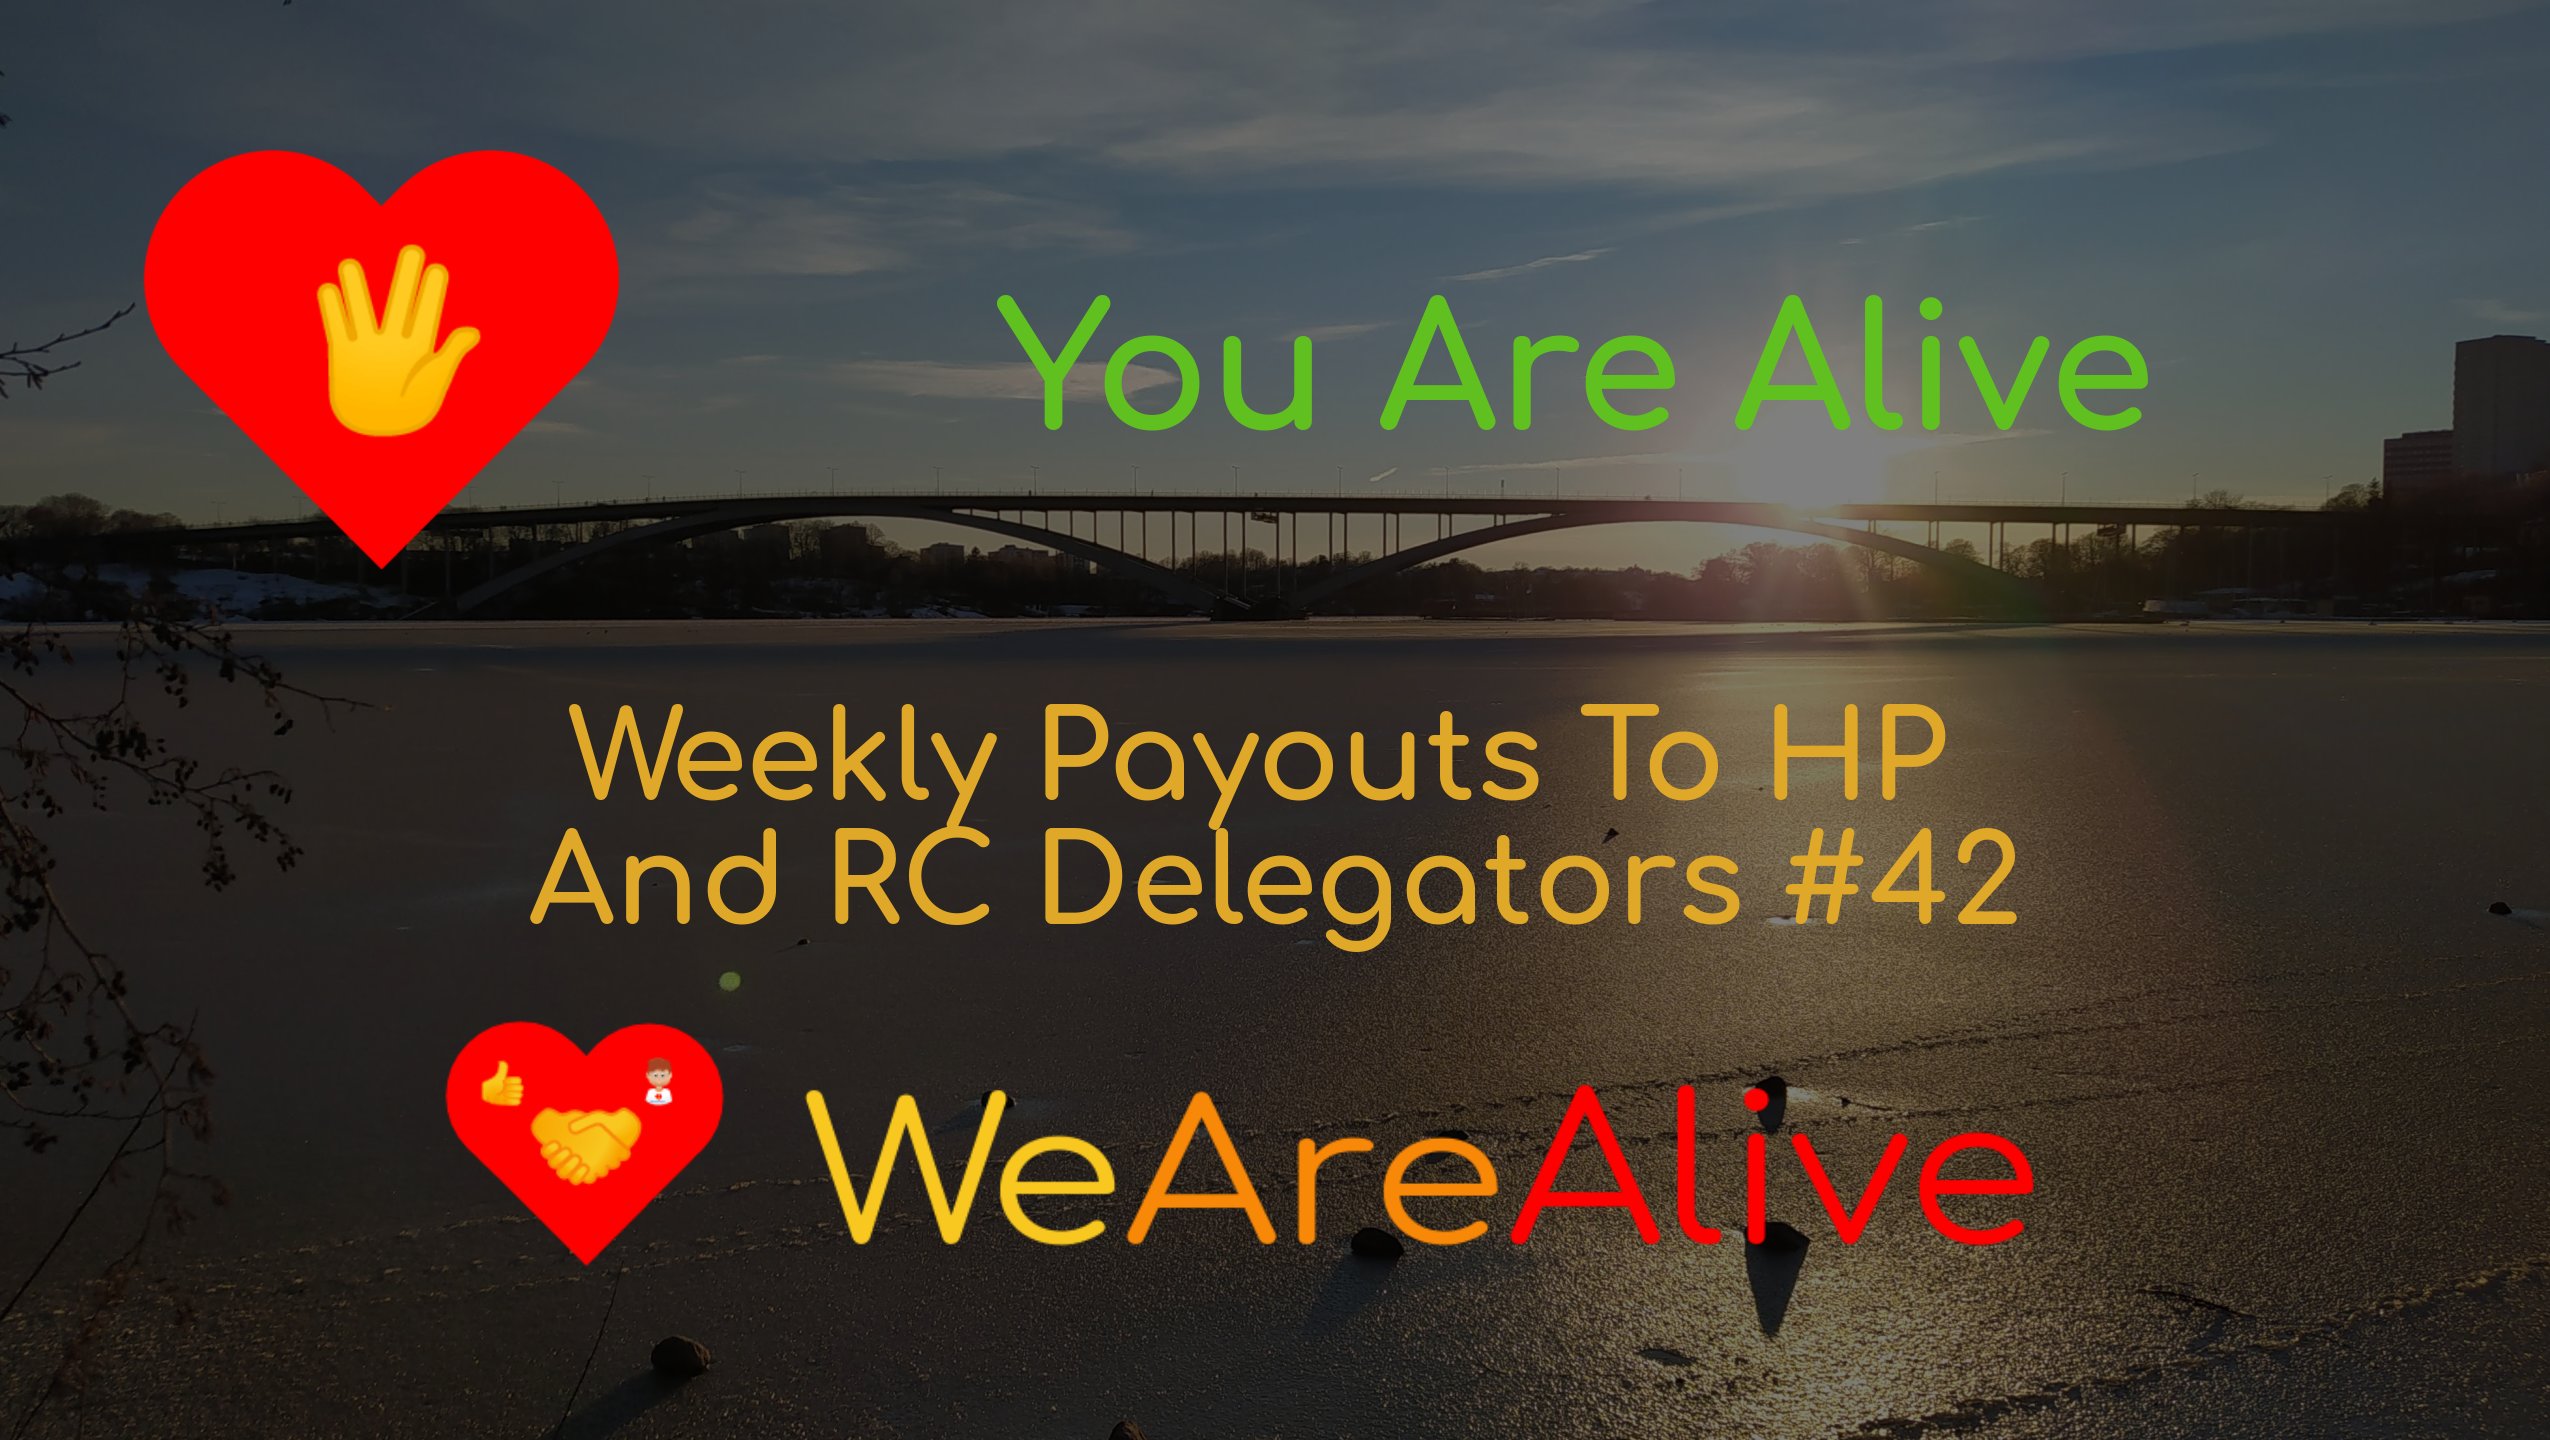 @youarealive/you-are-alive-weekly-payouts-to-hp-and-rc-delegators-42